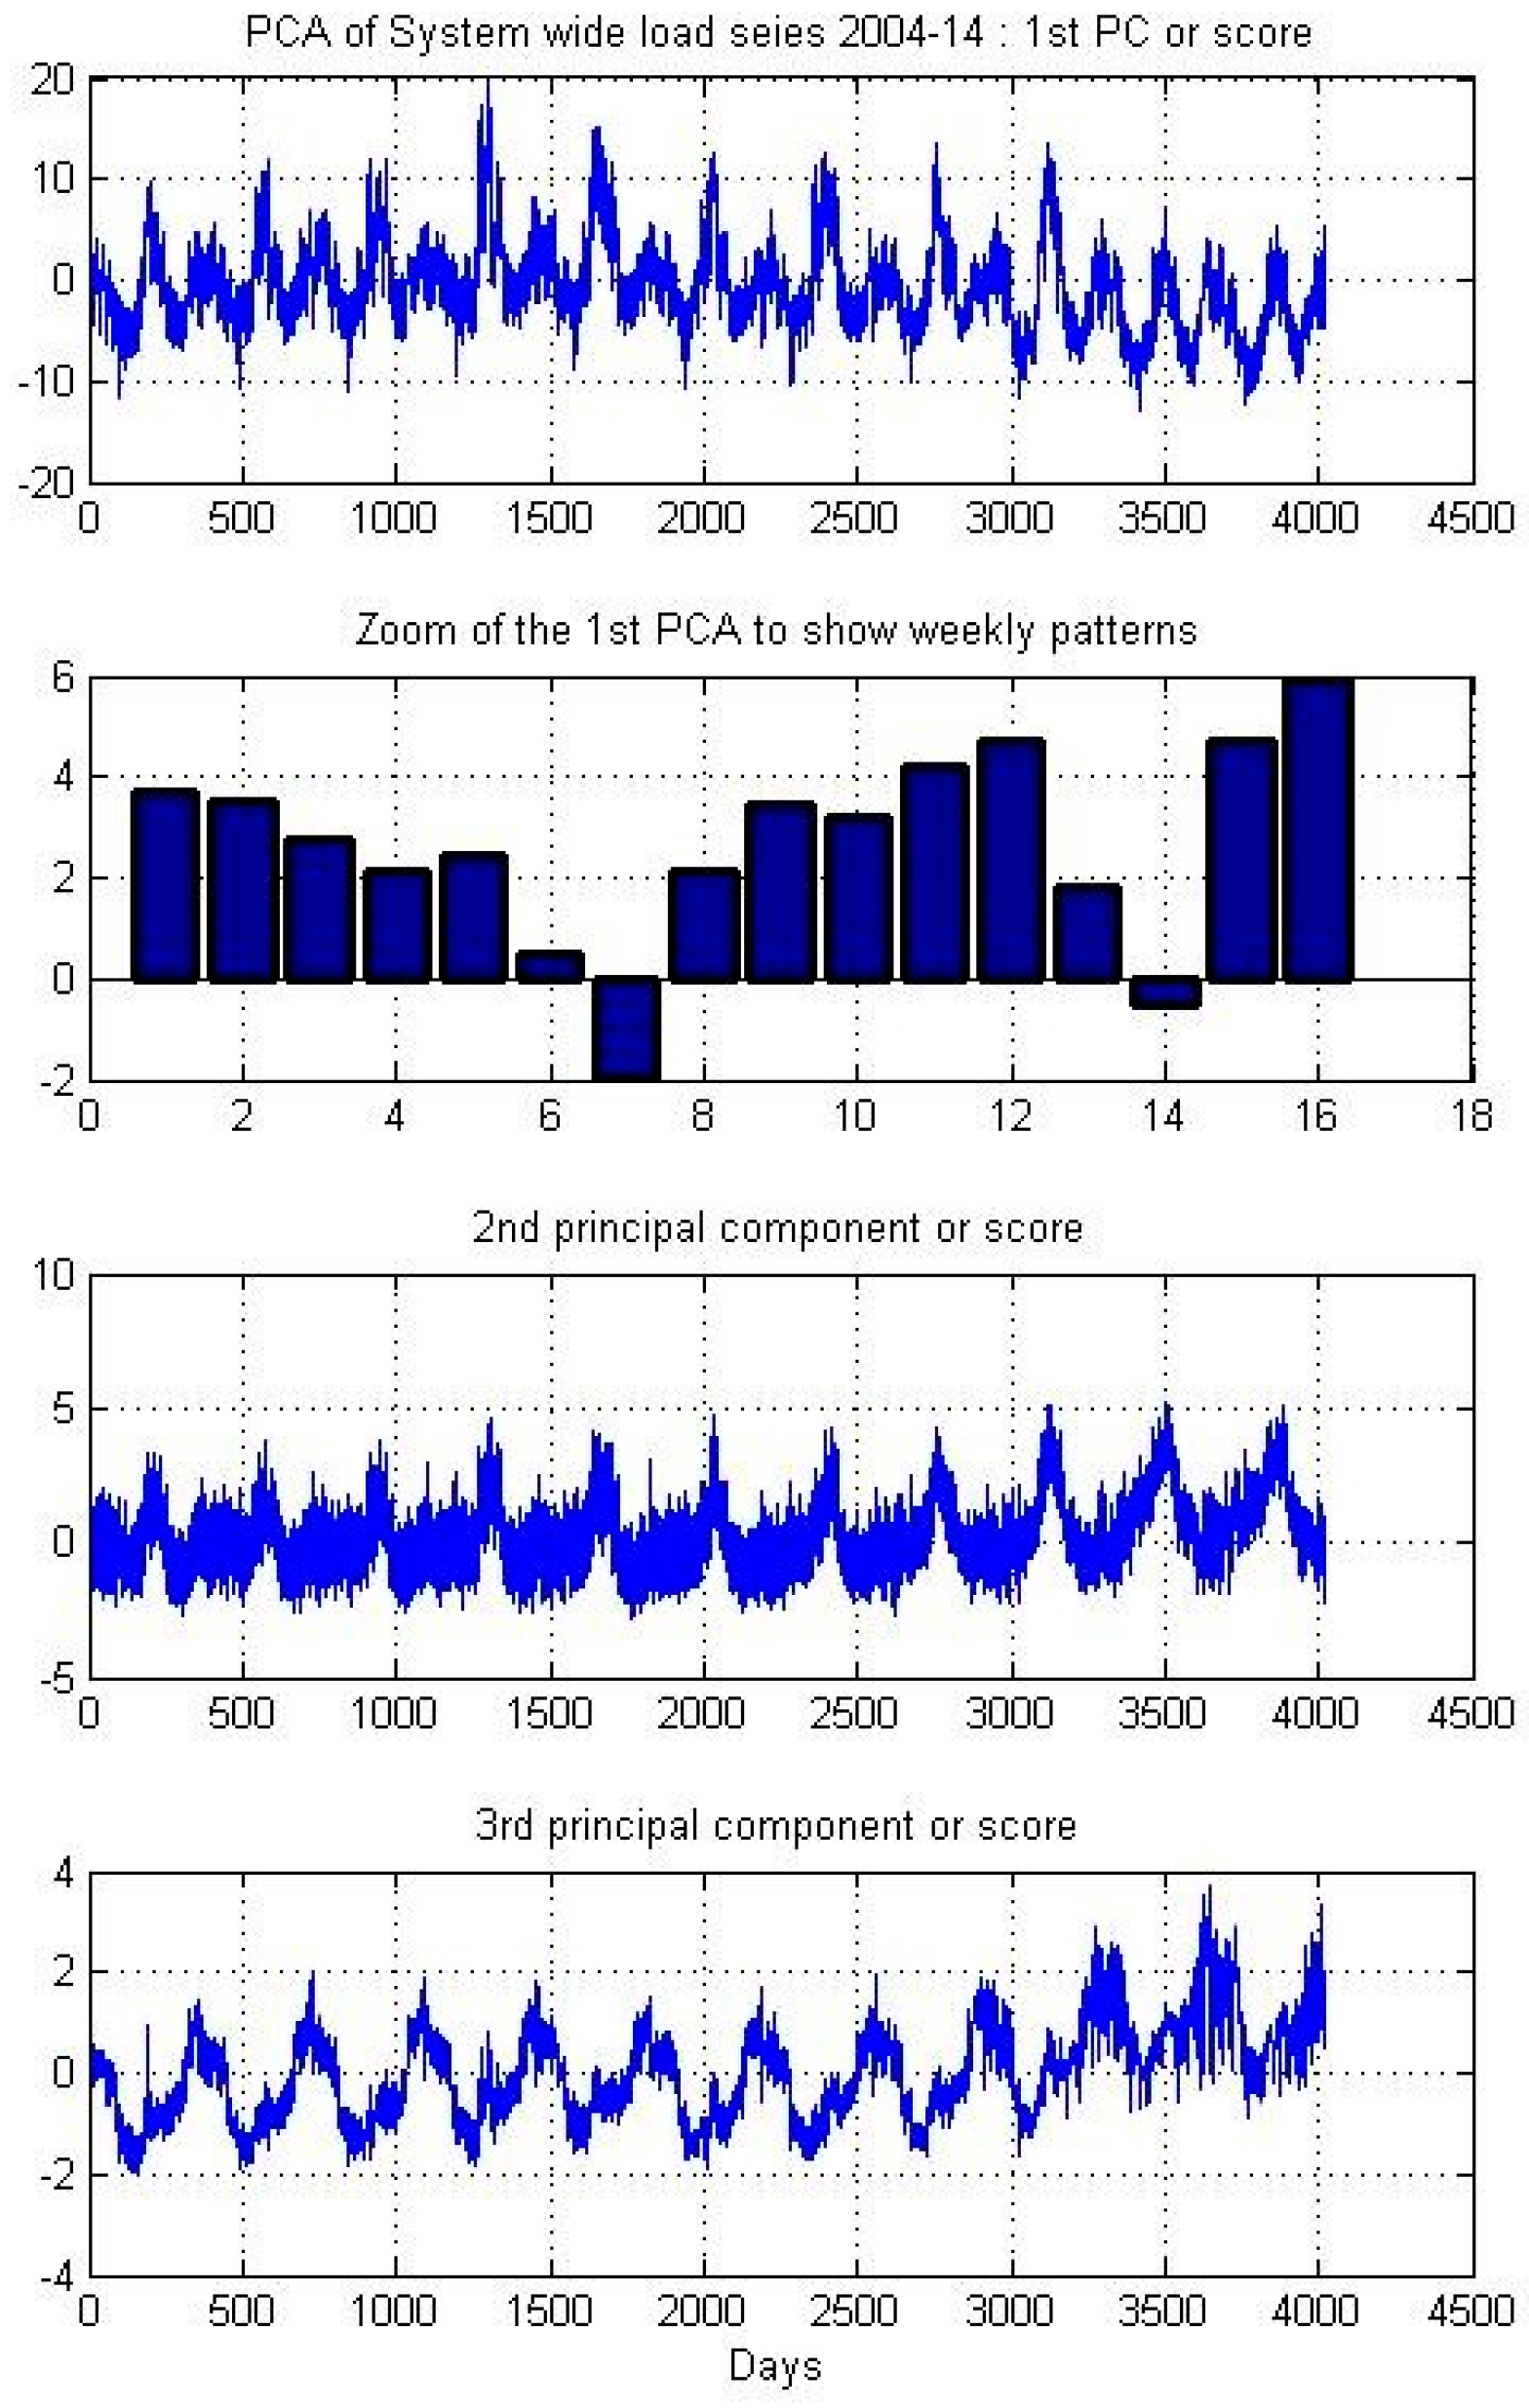 Energies | Free Full-Text | Analysis and Modeling for Short- to Medium-Term  Load Forecasting Using a Hybrid Manifold Learning Principal Component Model  and Comparison with Classical Statistical Models (SARIMAX, Exponential  Smoothing) and